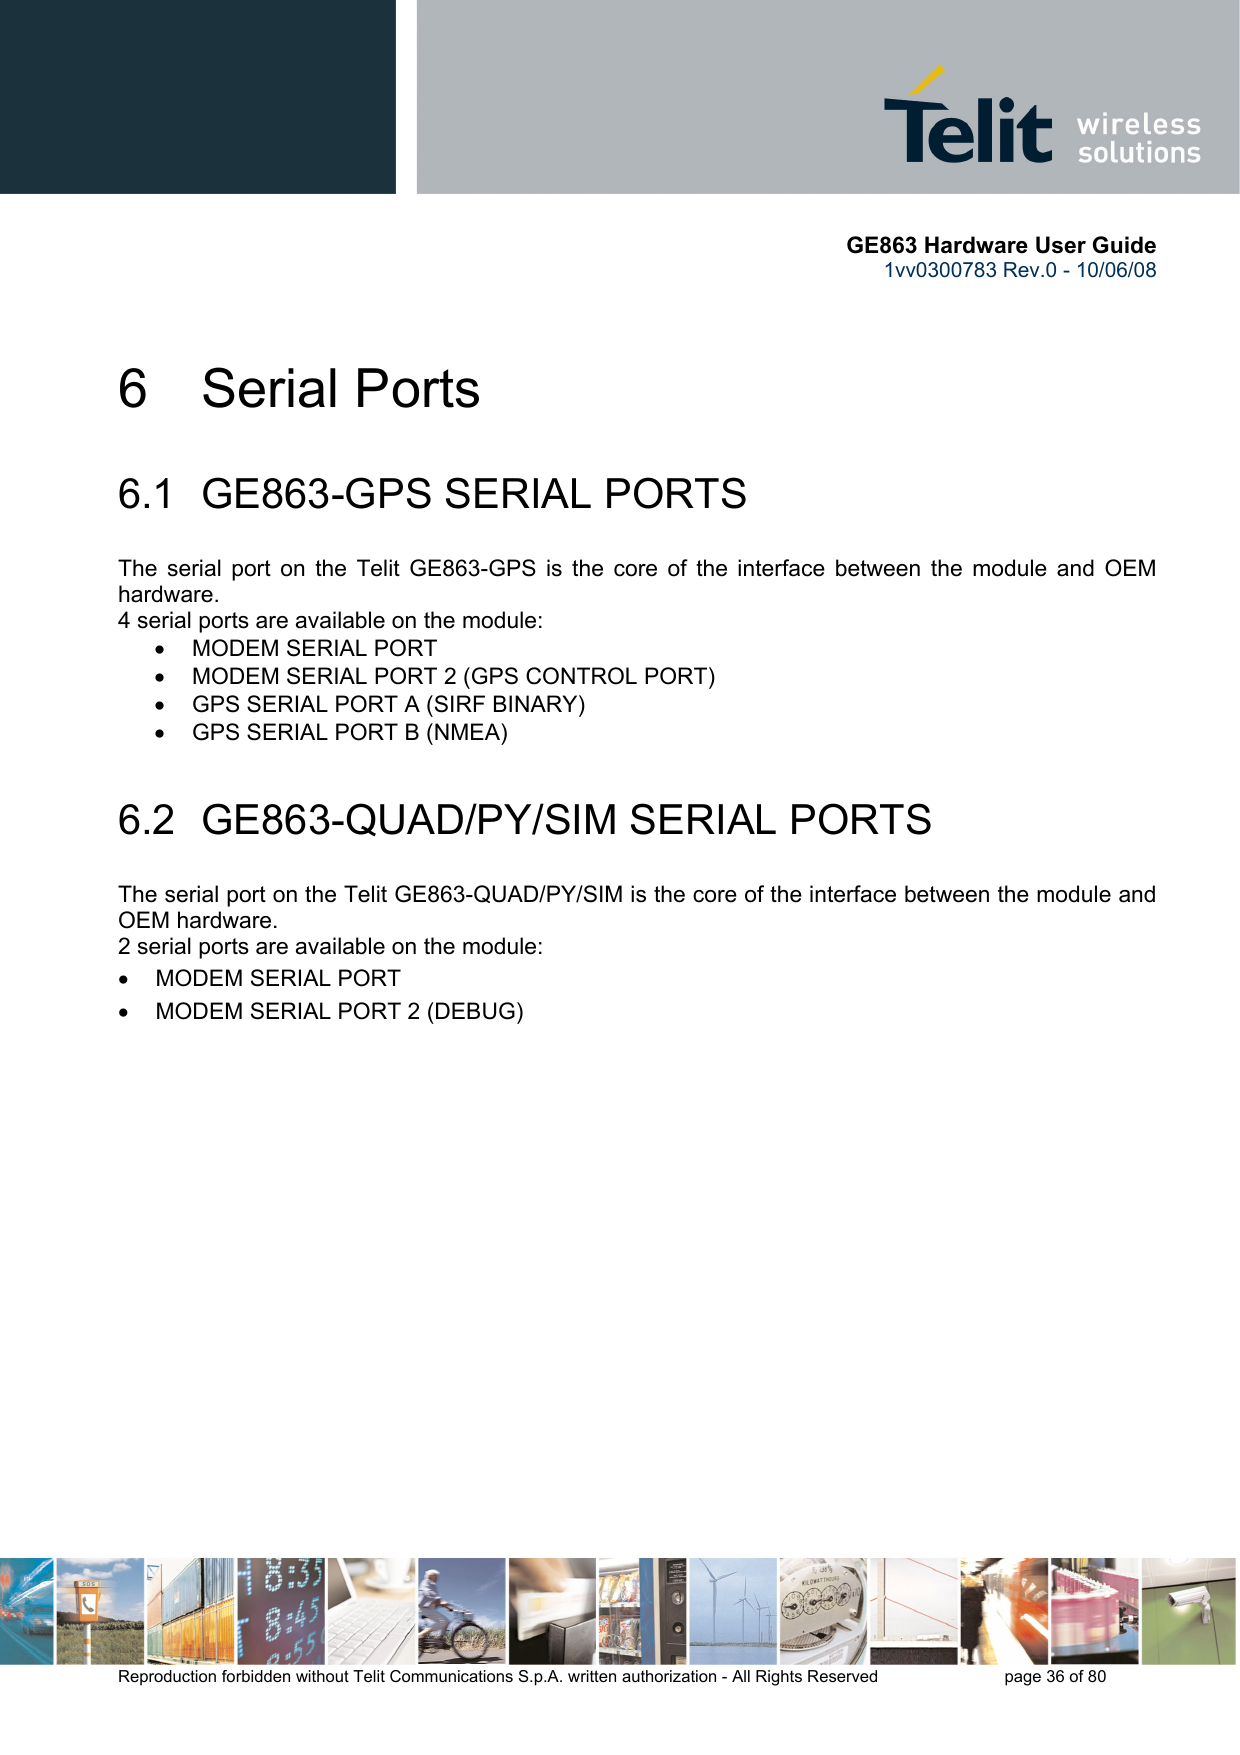       GE863 Hardware User Guide 1vv0300783 Rev.0 - 10/06/08 Reproduction forbidden without Telit Communications S.p.A. written authorization - All Rights Reserved    page 36 of 80  6 Serial Ports 6.1  GE863-GPS SERIAL PORTS The serial port on the Telit GE863-GPS is the core of the interface between the module and OEM hardware.  4 serial ports are available on the module: •  MODEM SERIAL PORT •  MODEM SERIAL PORT 2 (GPS CONTROL PORT) •  GPS SERIAL PORT A (SIRF BINARY) •  GPS SERIAL PORT B (NMEA) 6.2  GE863-QUAD/PY/SIM SERIAL PORTS The serial port on the Telit GE863-QUAD/PY/SIM is the core of the interface between the module and OEM hardware.  2 serial ports are available on the module: •  MODEM SERIAL PORT •  MODEM SERIAL PORT 2 (DEBUG)  